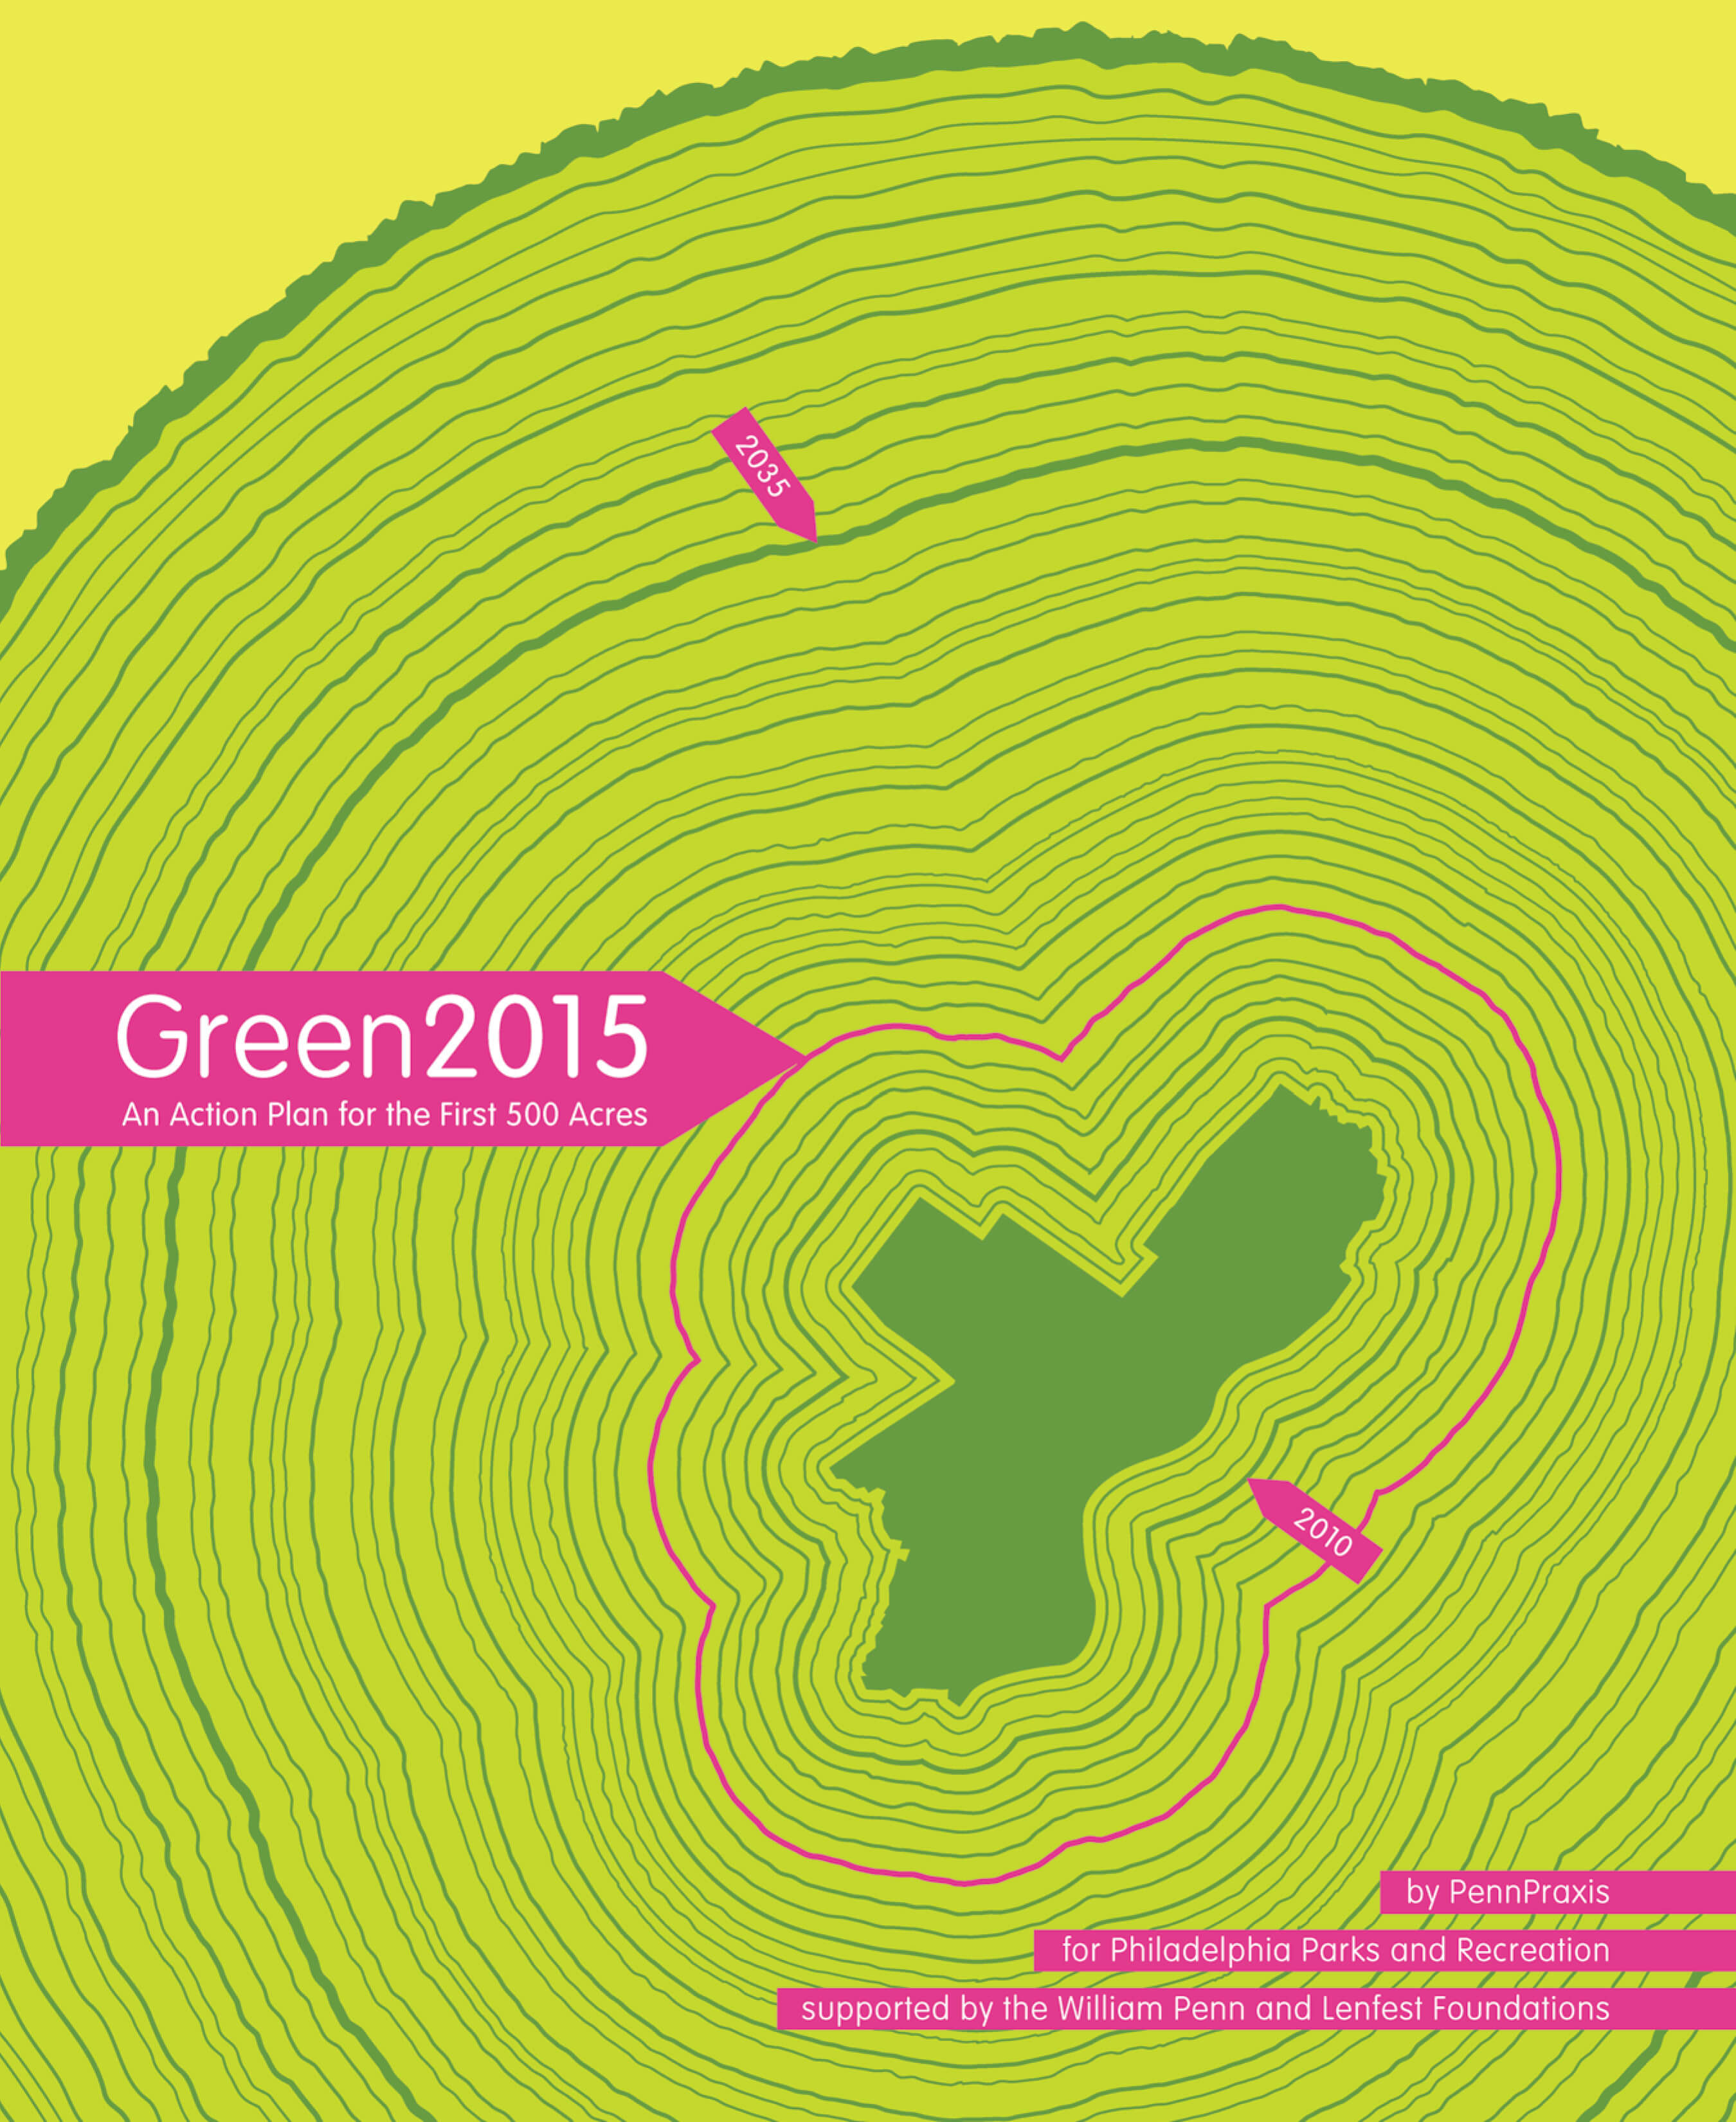 Green2015 An Action Plan for Philadelphia Parks and Recreation